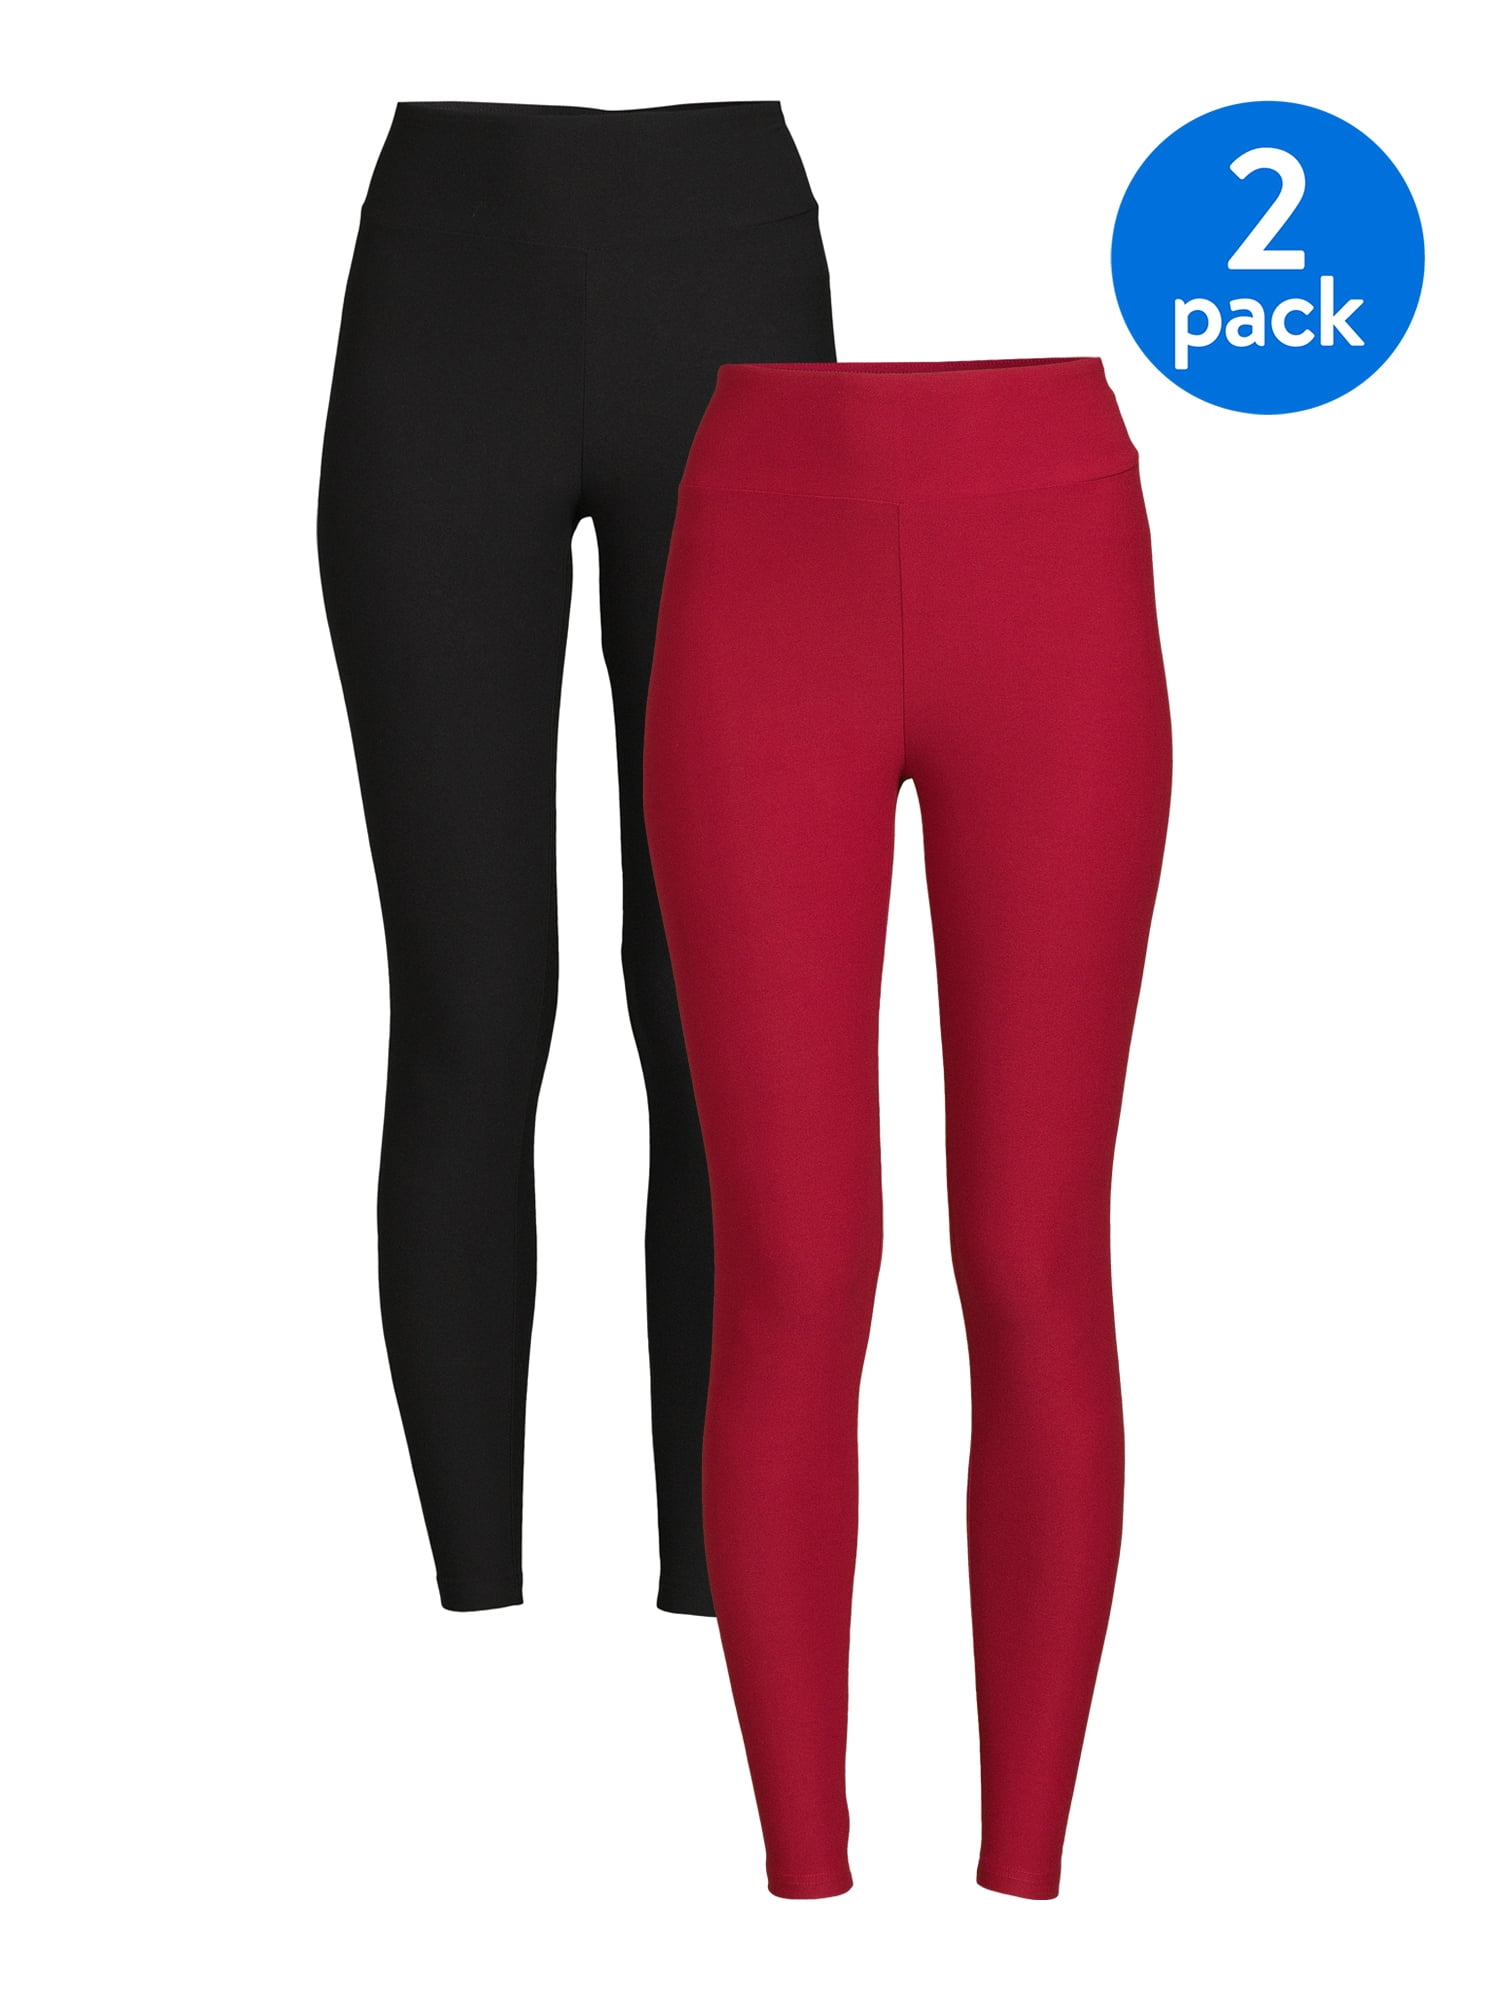 Eye Candy Juniors' Leggings with Ruched Back, 2-Pack - Walmart